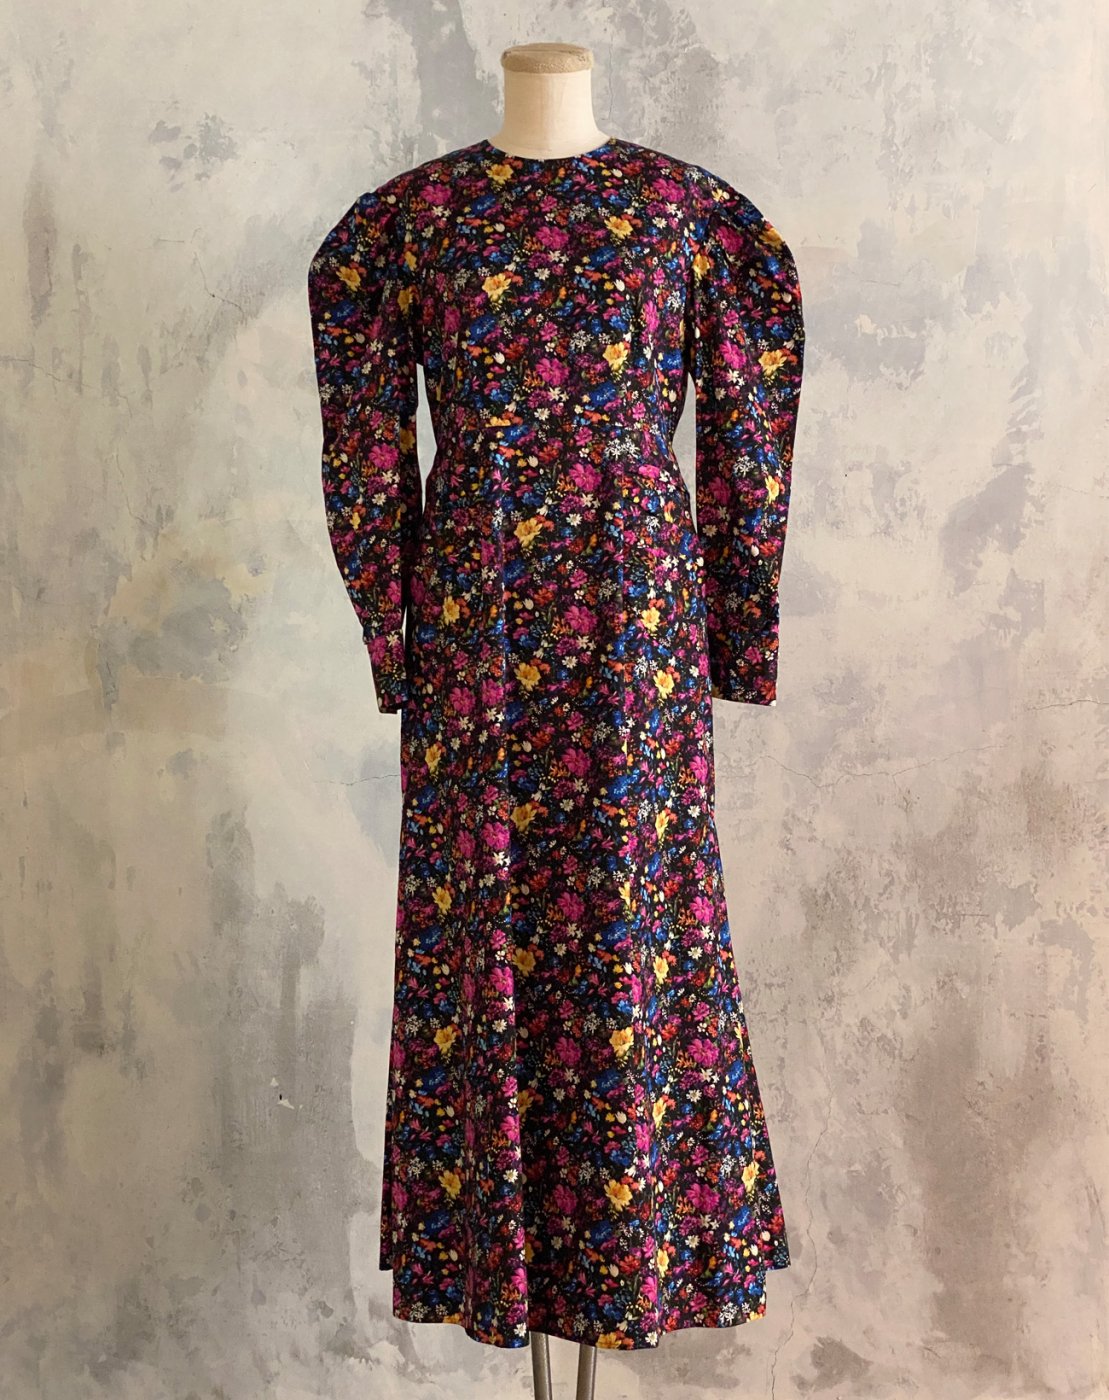 leur logette - <img class='new_mark_img1' src='https://img.shop-pro.jp/img/new/icons2.gif' style='border:none;display:inline;margin:0px;padding:0px;width:auto;' />Marianna Flower Print Dress - Black